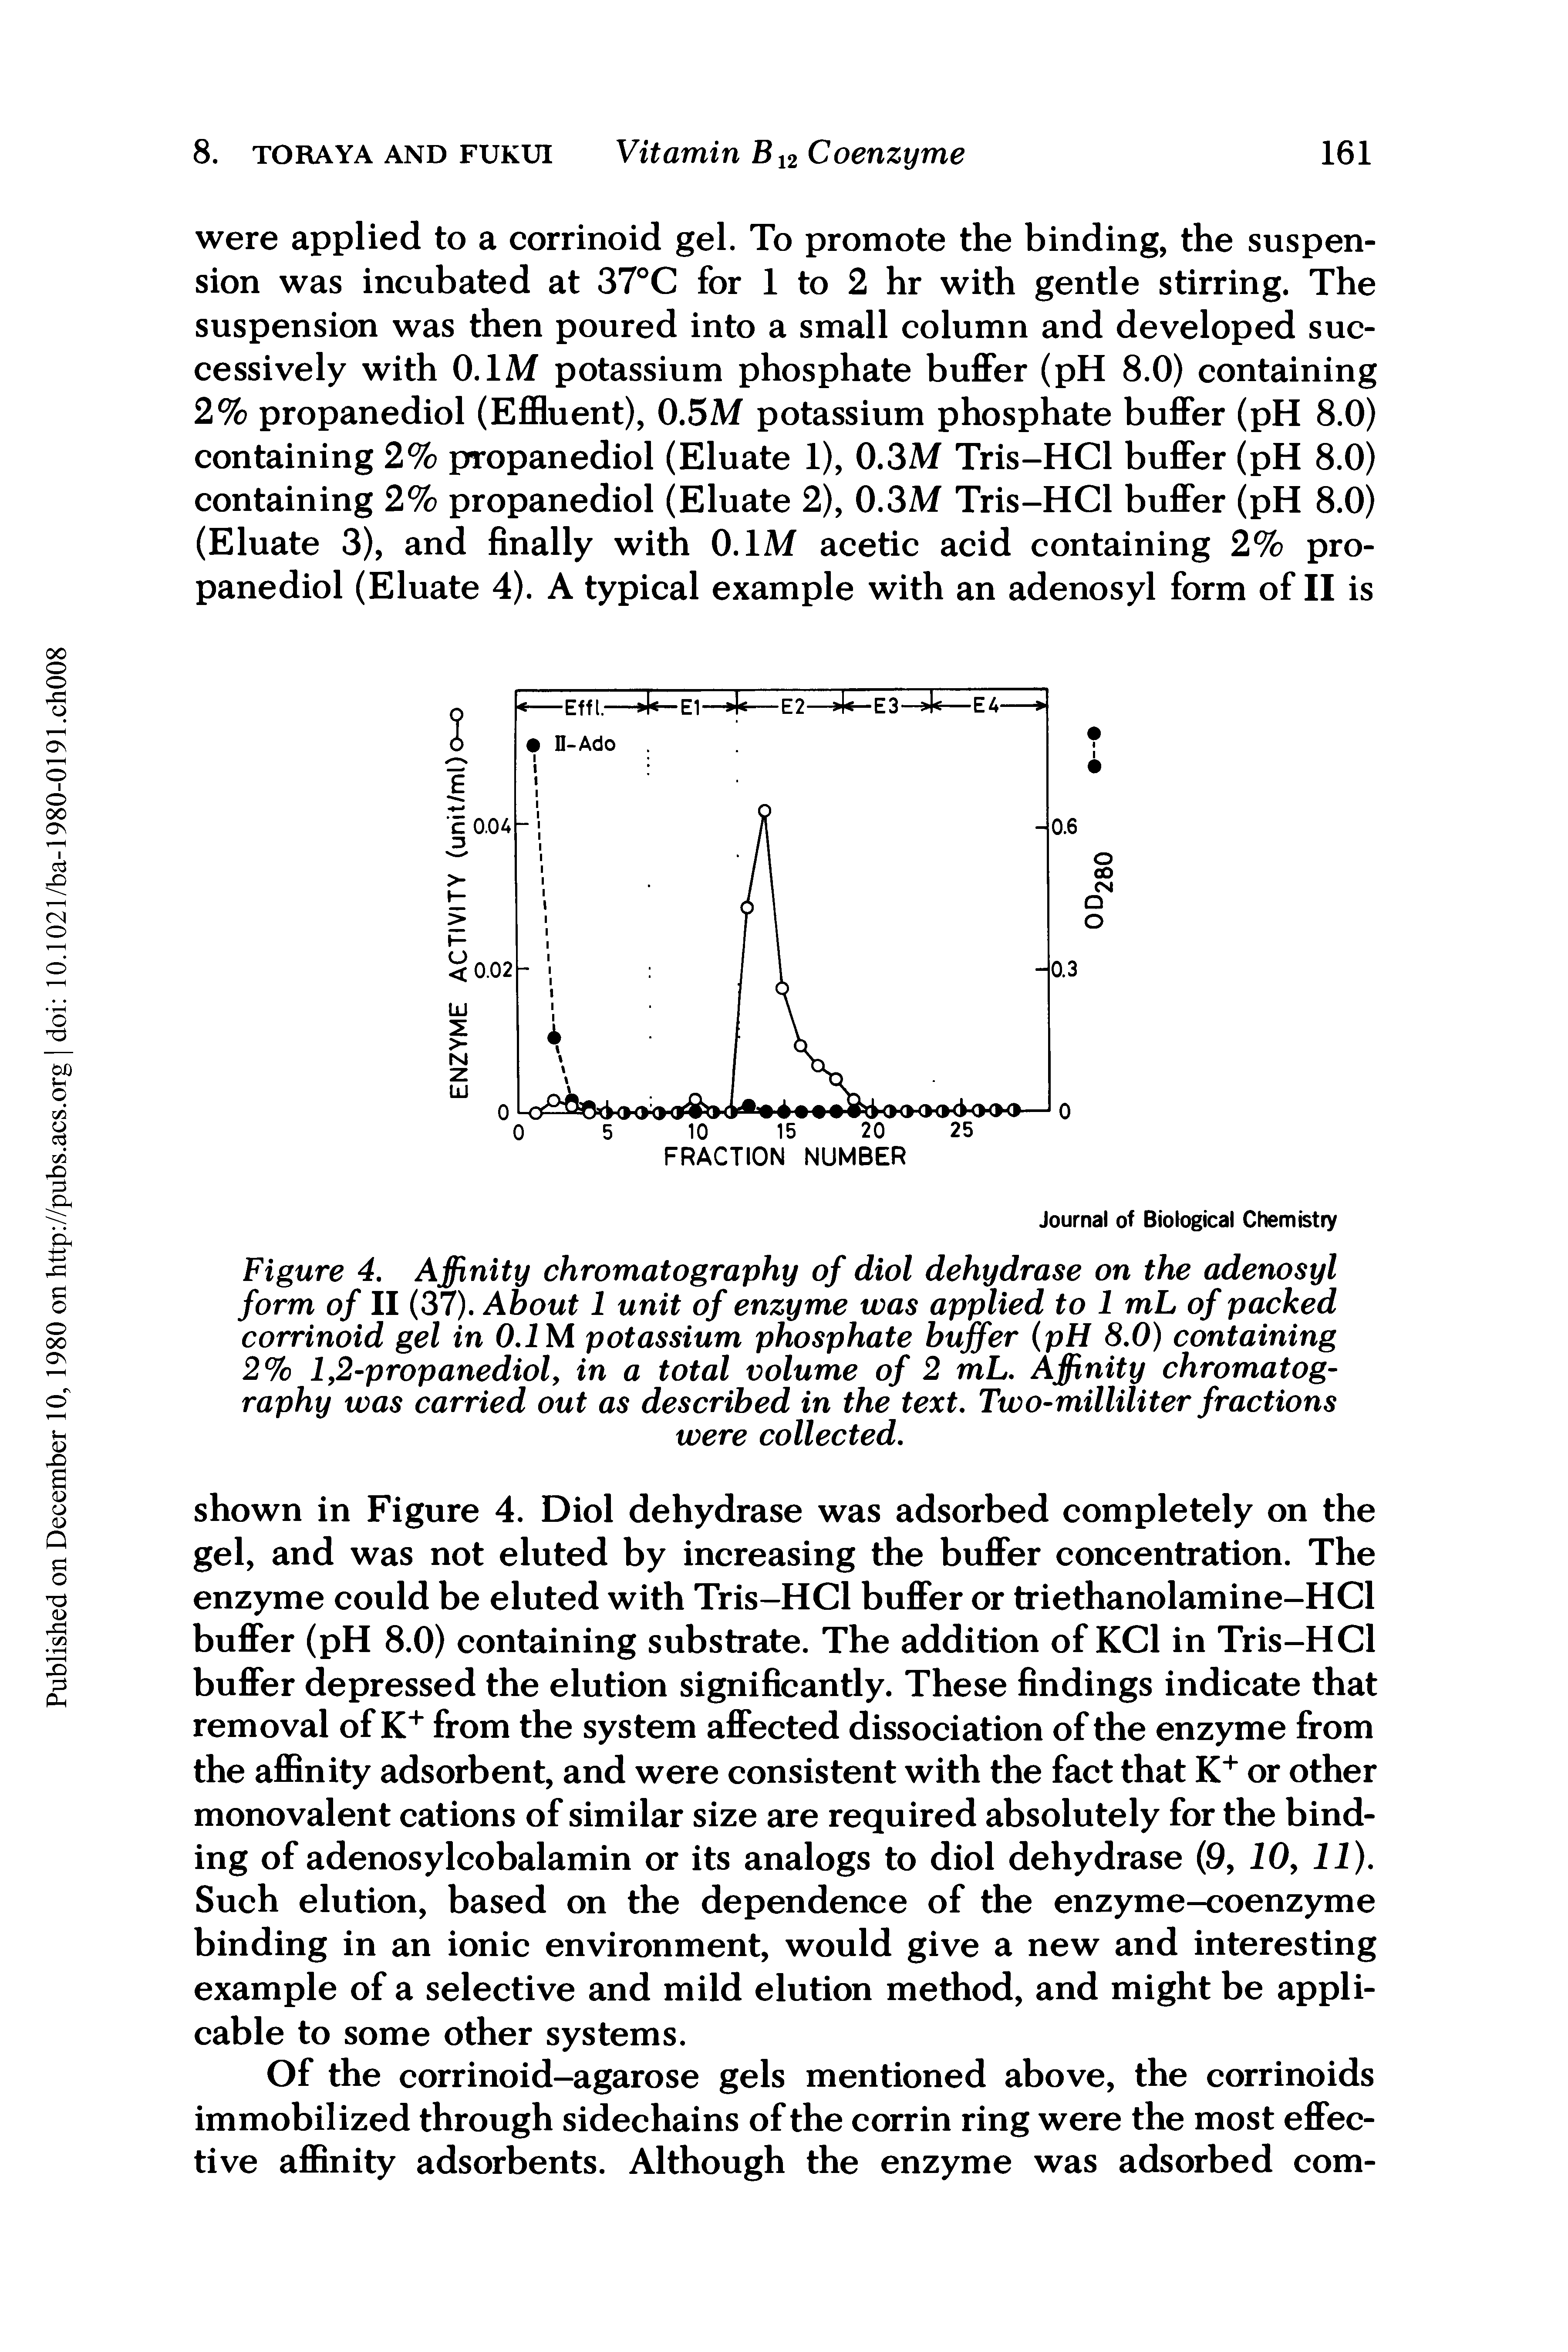 Figure 4. Affinity chromatography of diol dehydrase on the adenosyl form of II (37). About 1 unit of enzyme was applied to 1 mL of packed corrinoid gel in 0.1 M potassium phosphate buffer (pH 8.0) containing 2% 1,2-propanediol, in a total volume of 2 mL. Affinity chromatography was carried out as described in the text. Two-milliliter fractions...